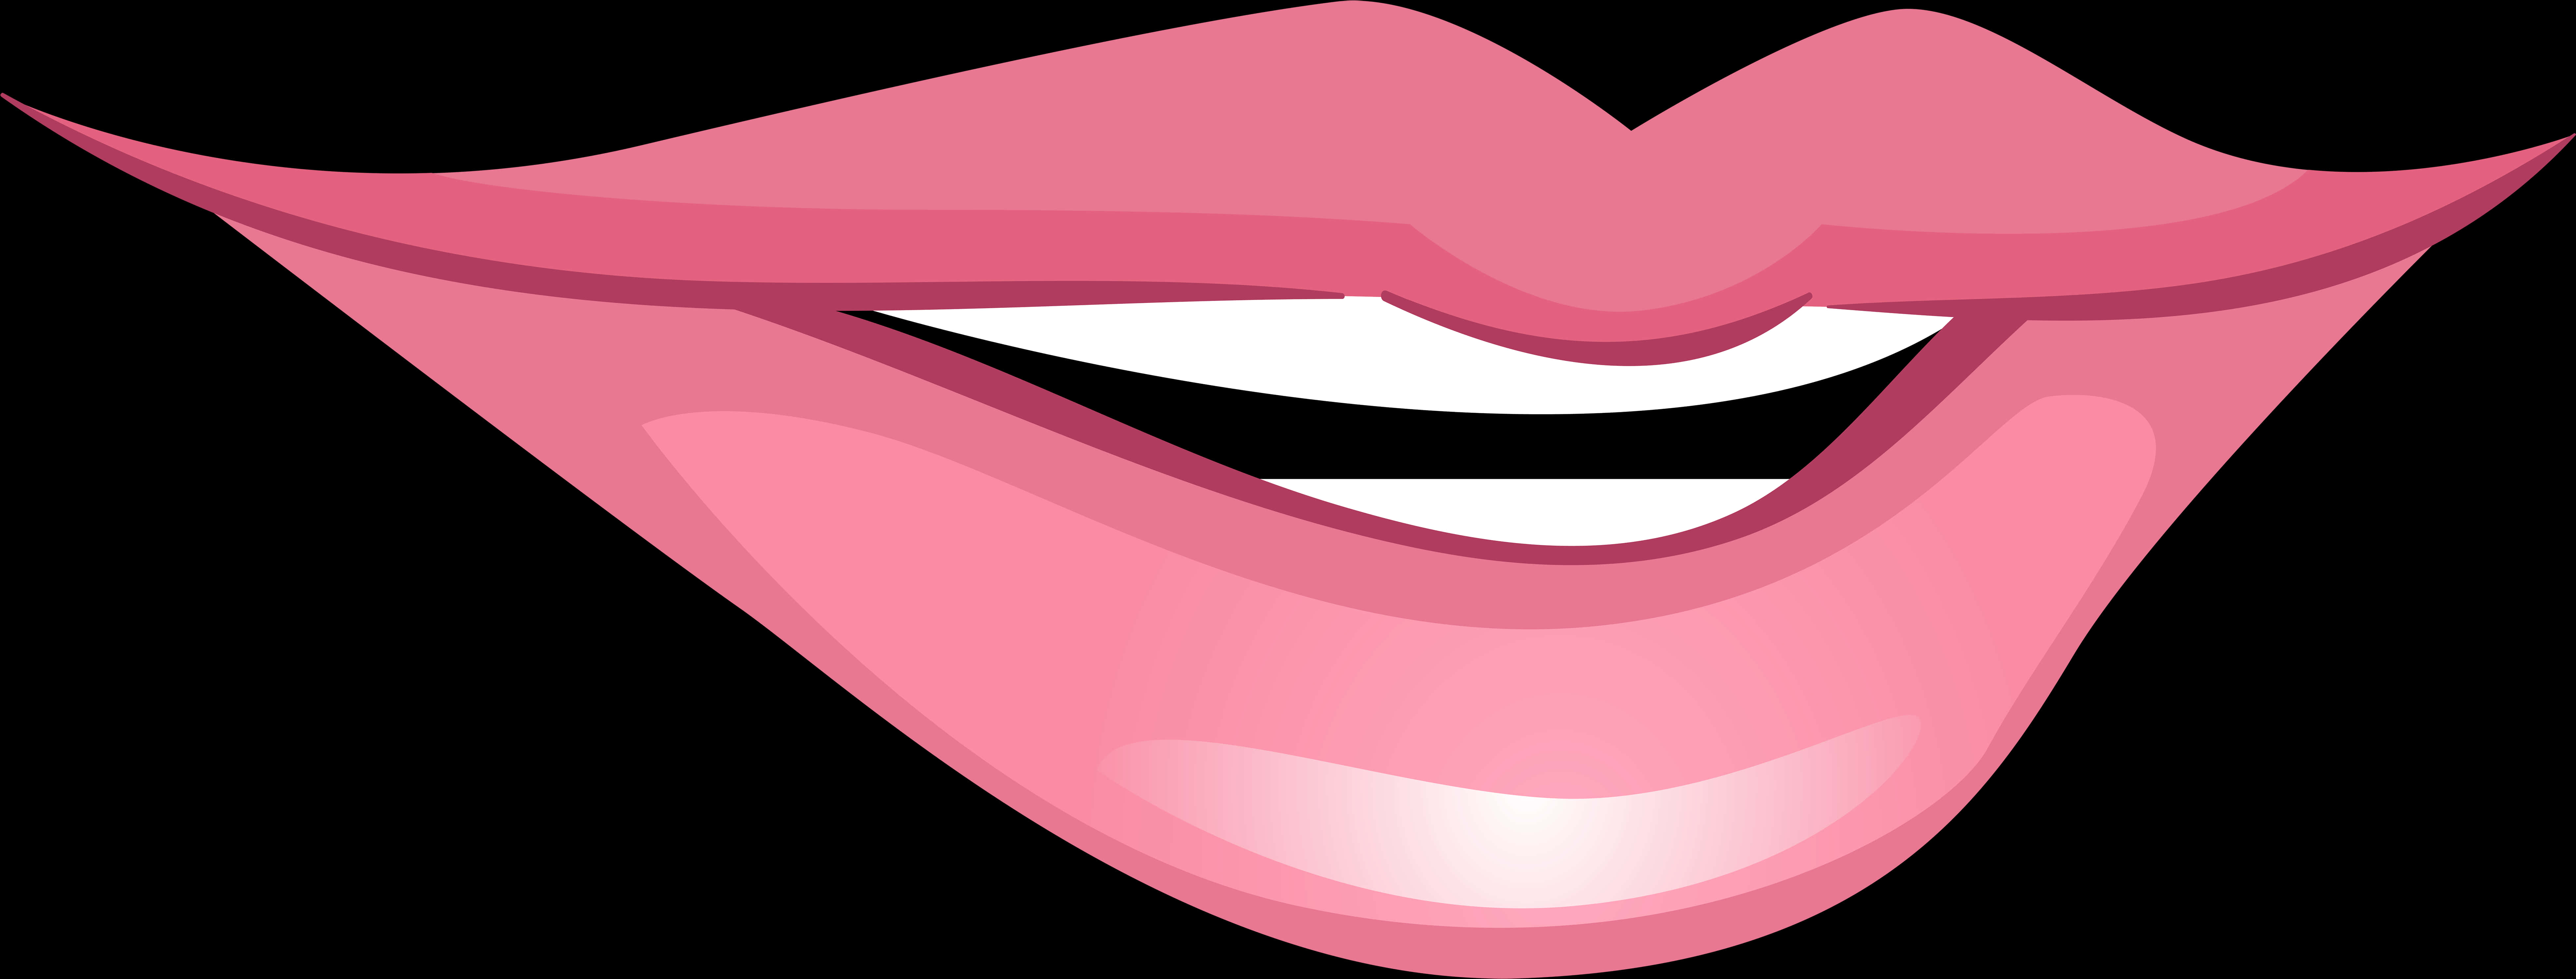 Stylized Cartoon Smiling Mouth SVG